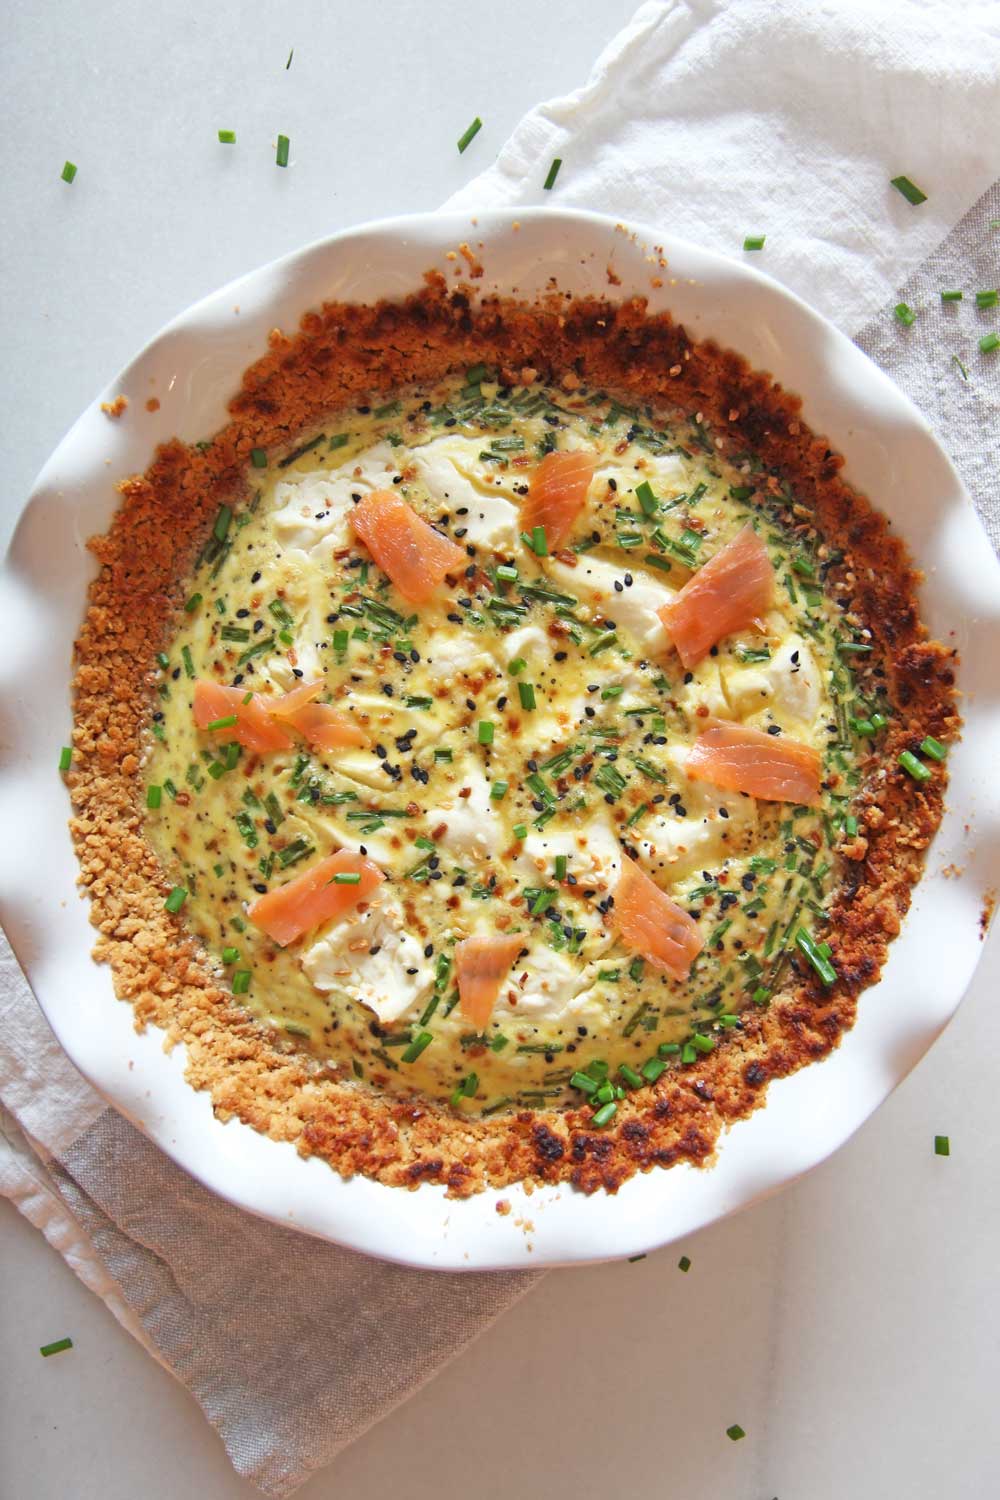 Bagel and Lox Quiche with Matzo Pie Crust Recipe. Perfect Passover recipe that is kosher for Passover. This tasted like a bagel with lox and cream cheese on an hot everything bagel. Lox, cream cheese, everything bagel seasoning, chives, eggs, and milk make up this awesome recipe. You can eat this for brunch, breakfast, dinner, or a snack. Happy Passover! www.ChopHappy.com #Passoverrecipe #matzo